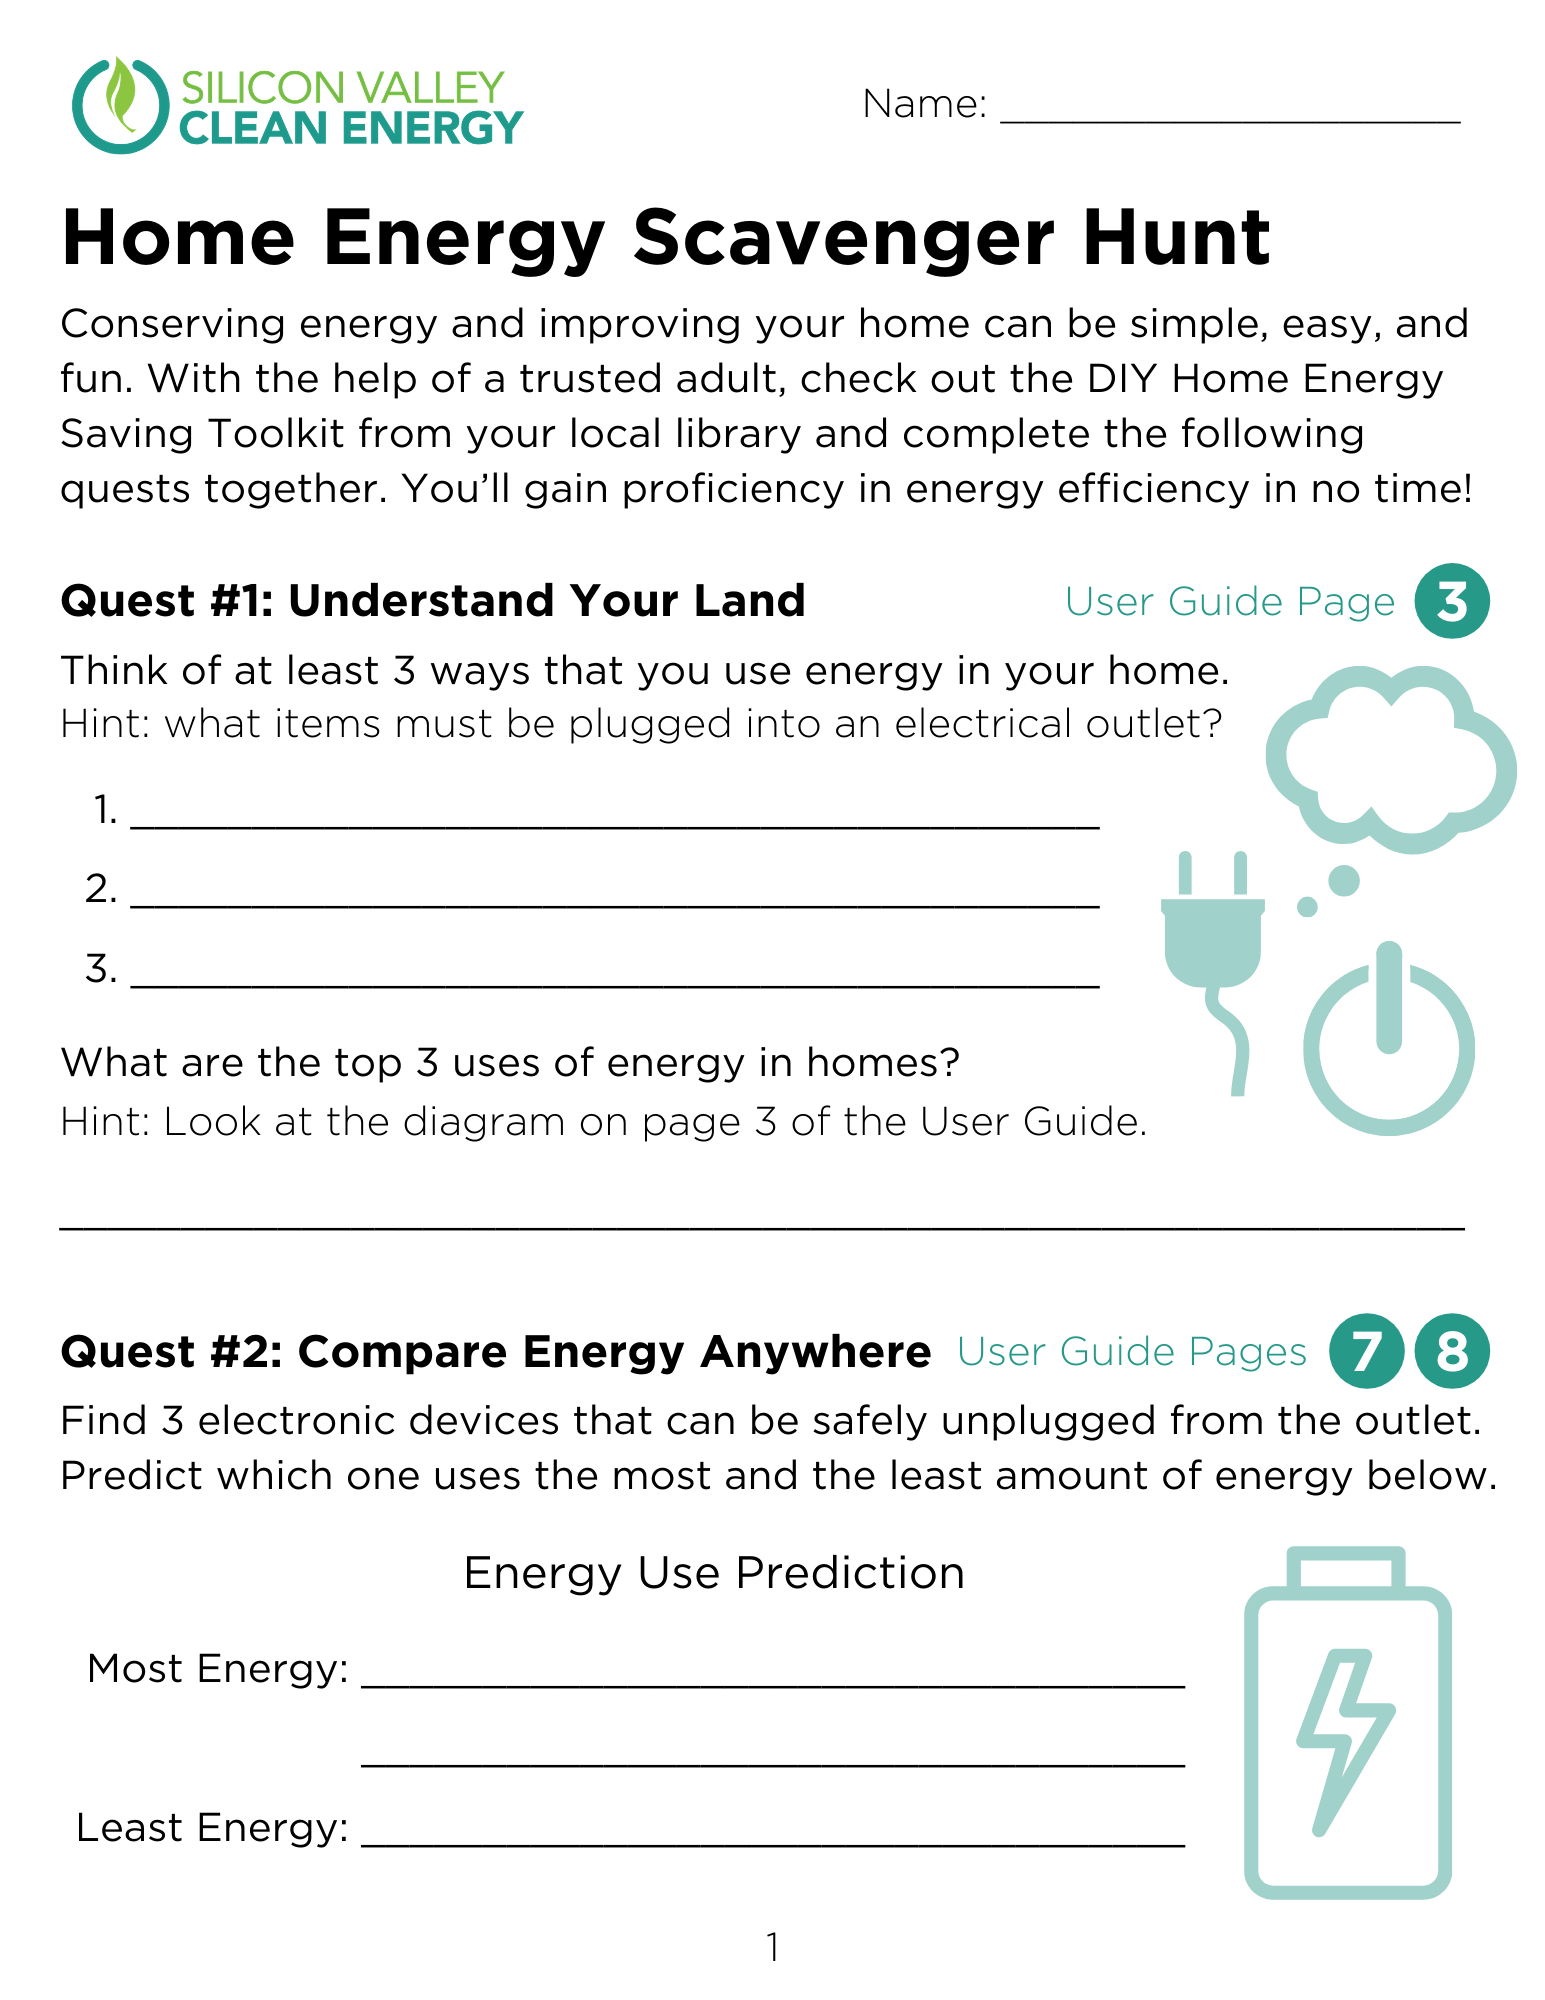 screenshot of the home energy scavenger hunt print out